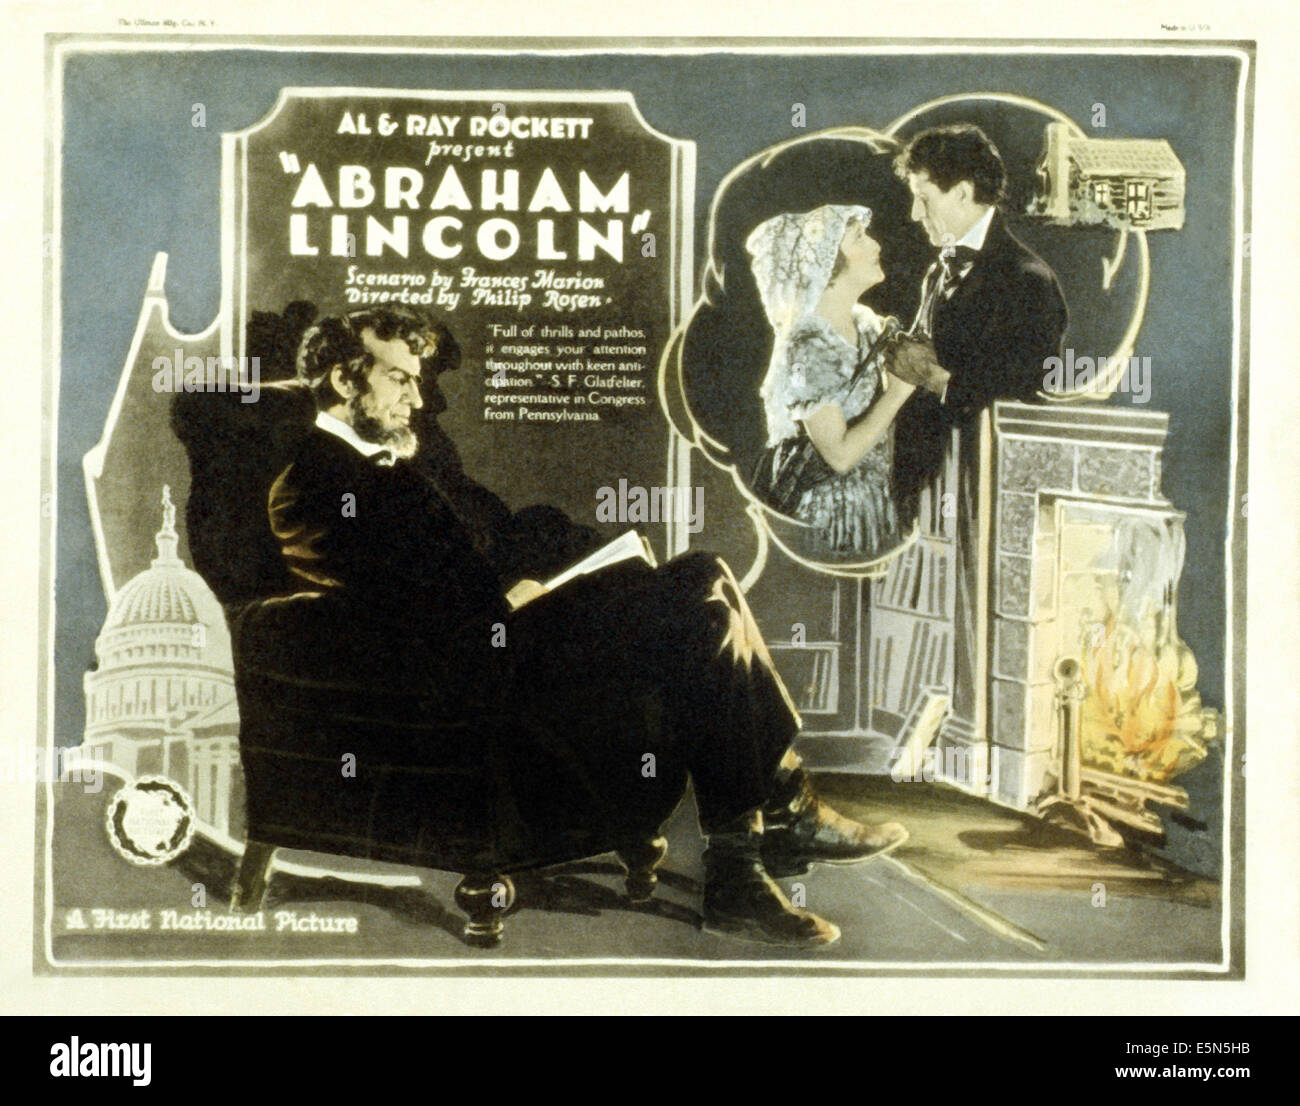 ABRAHAM LINCOLN, (aka THE DRAMATIC LIFE OF ABRAHAM LINCOLN), top right: Nell Craig, George A. Billings, 1924 Stock Photo